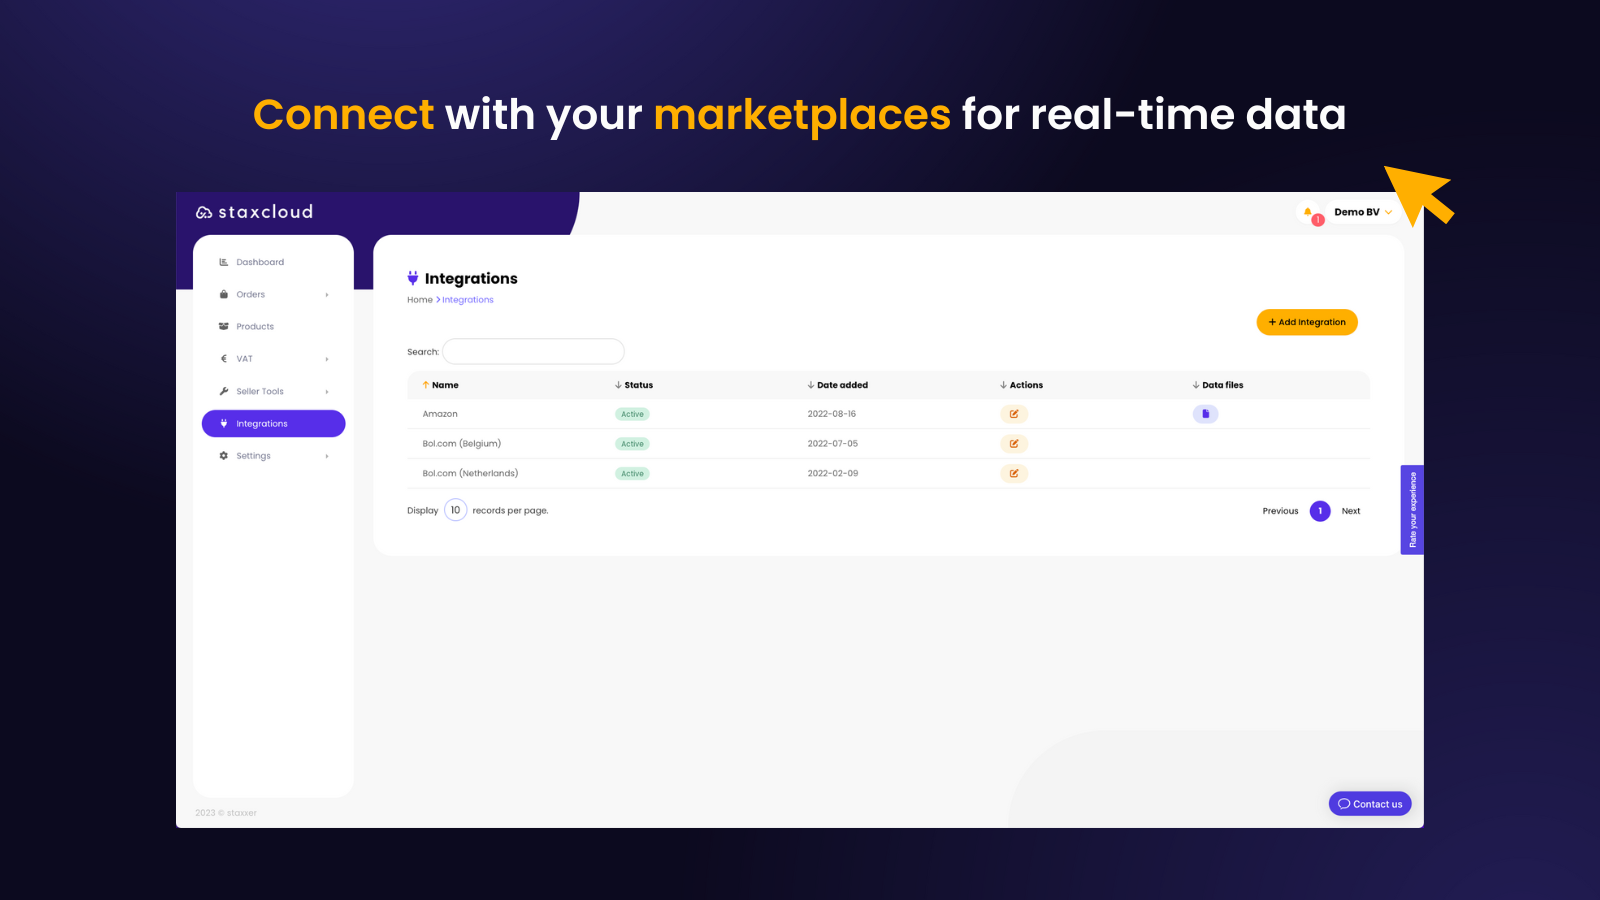 Connect with your marketplaces for real-time data